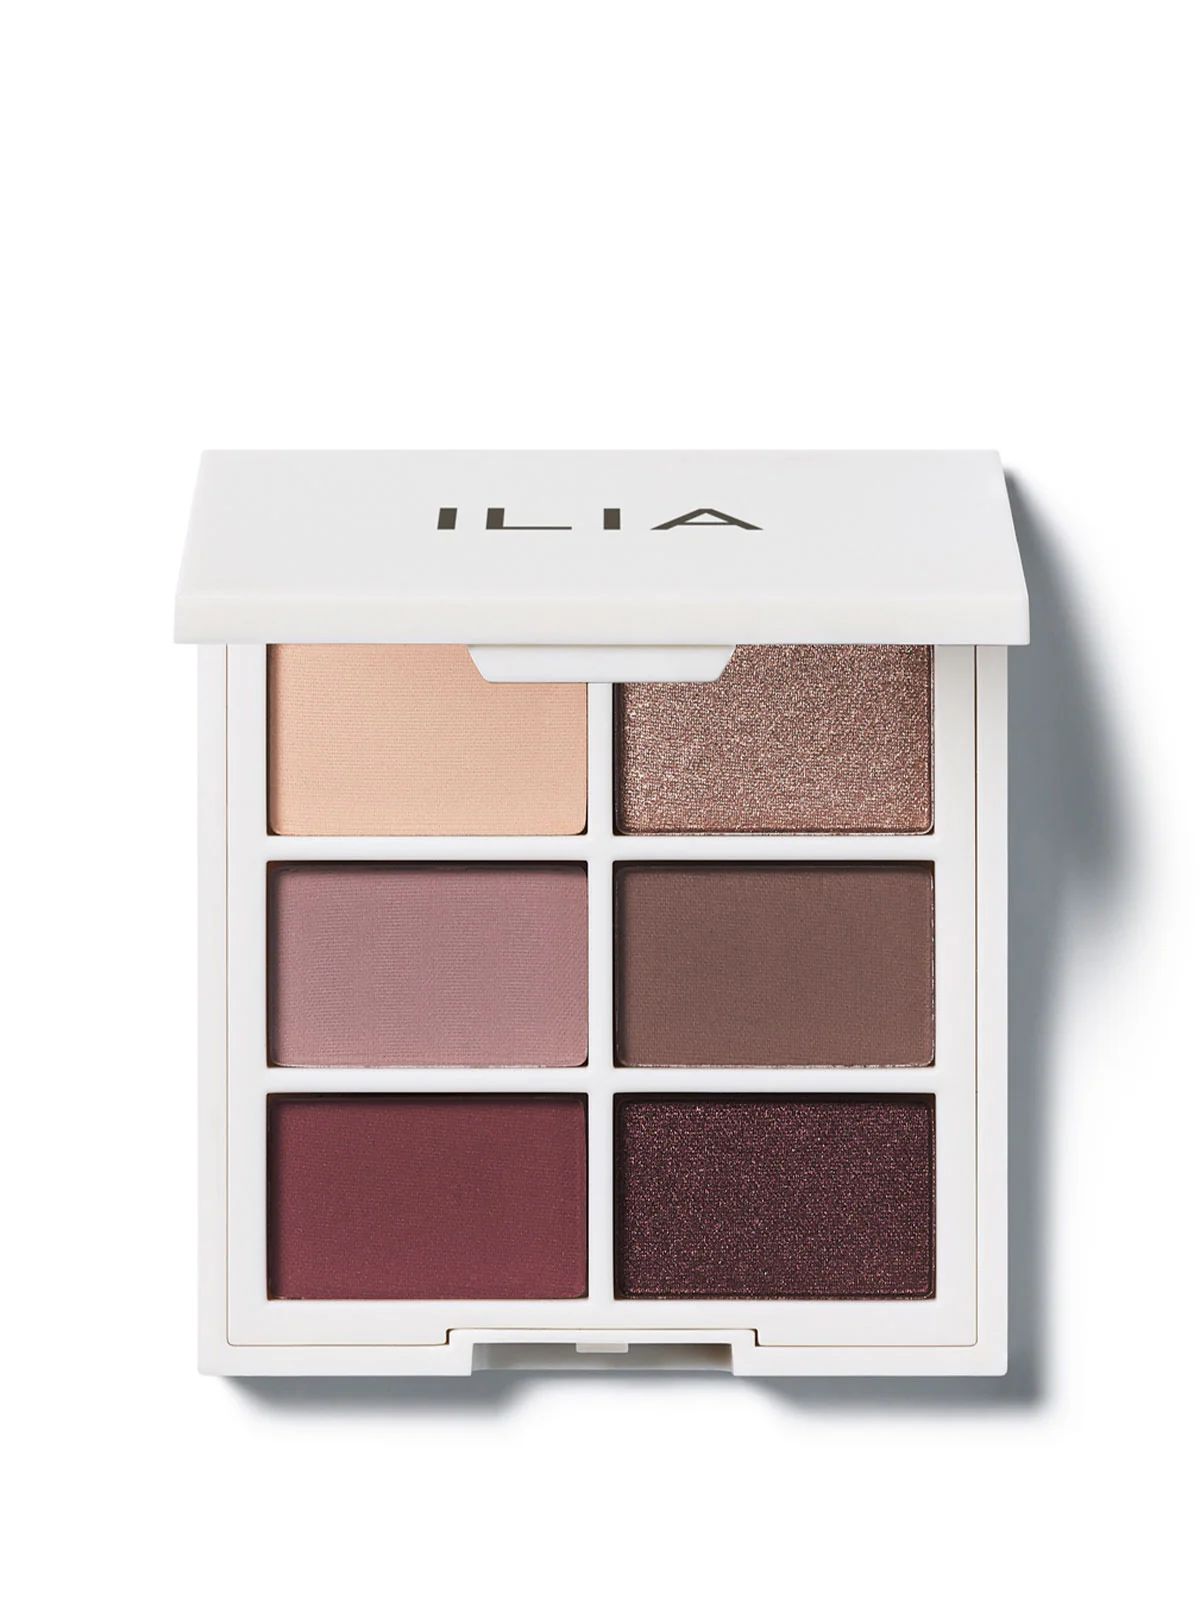 The Necessary Eyeshadow Palette - Clean, Natural Eyeshadows in Cool Nude Colors | ILIA Beauty